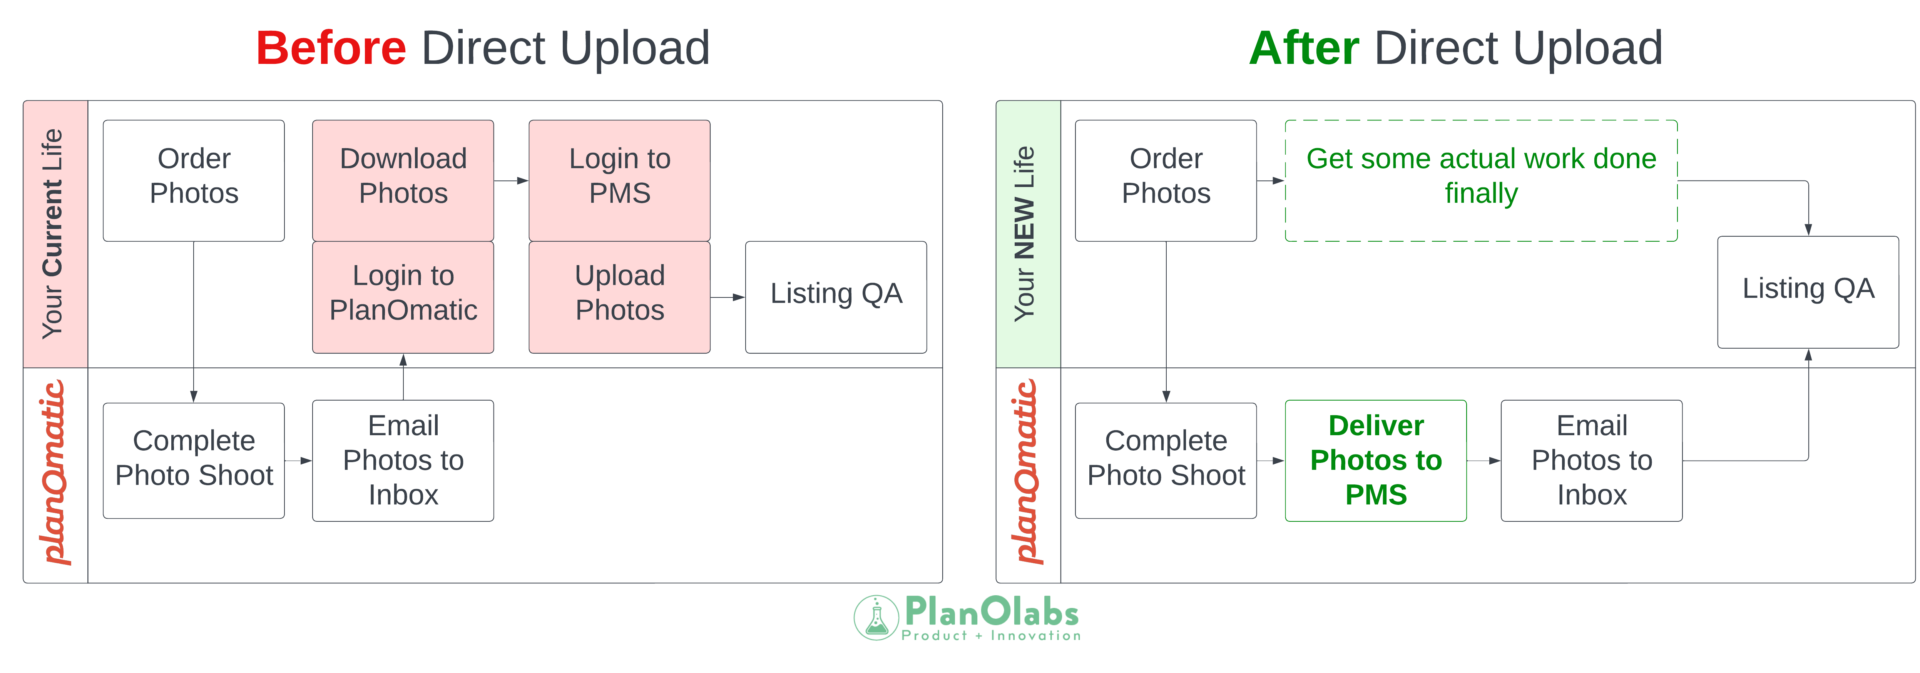 Direct Upload Workflows process chart